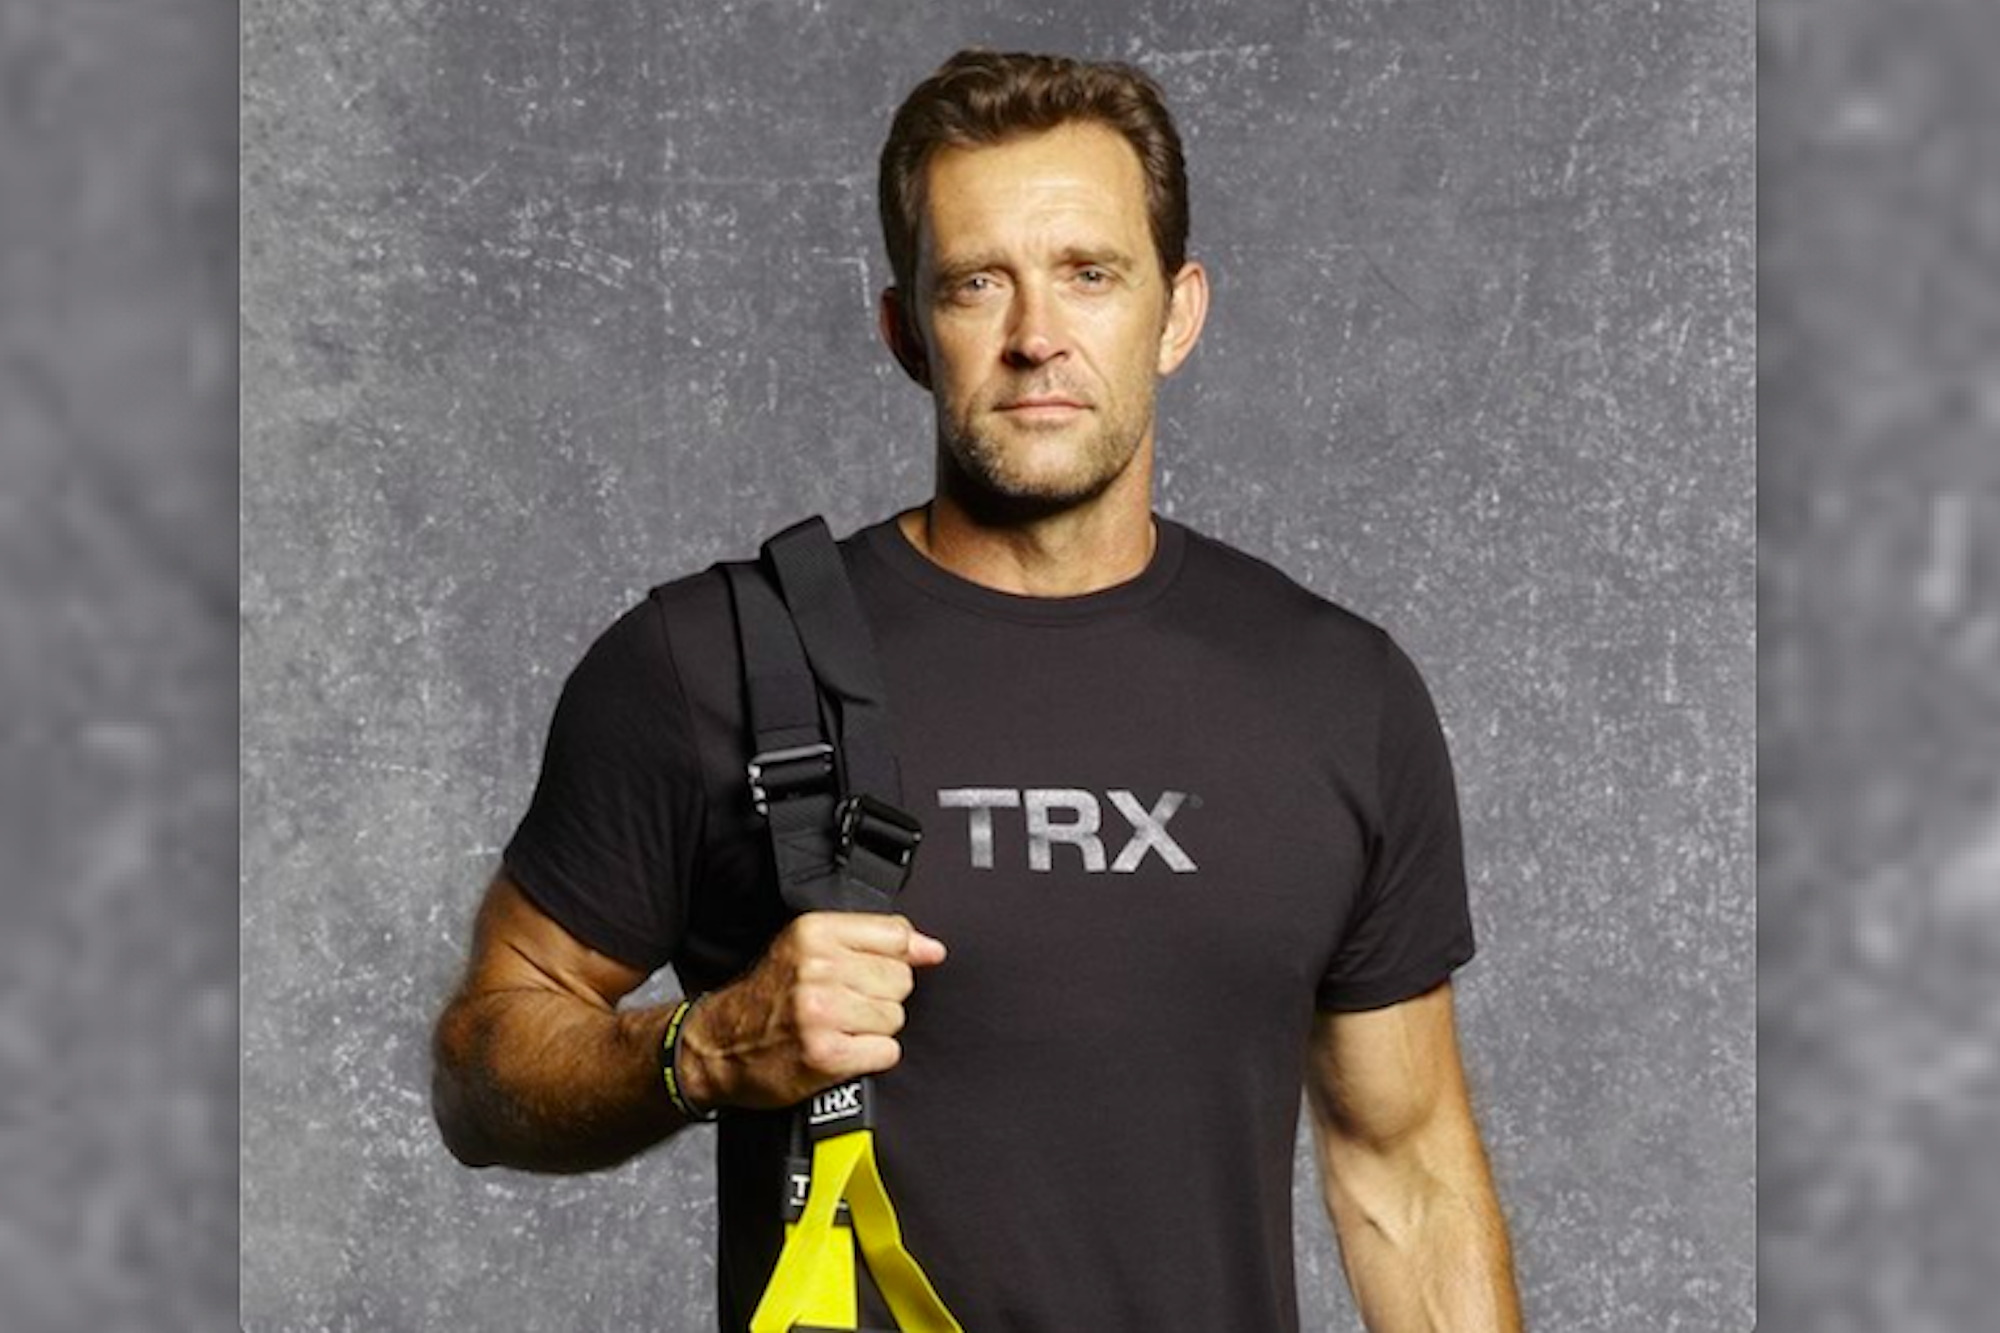 How This Retired Navy SEAL's Second-Act Turned into a Multi-Million Dollar Fitness Empire